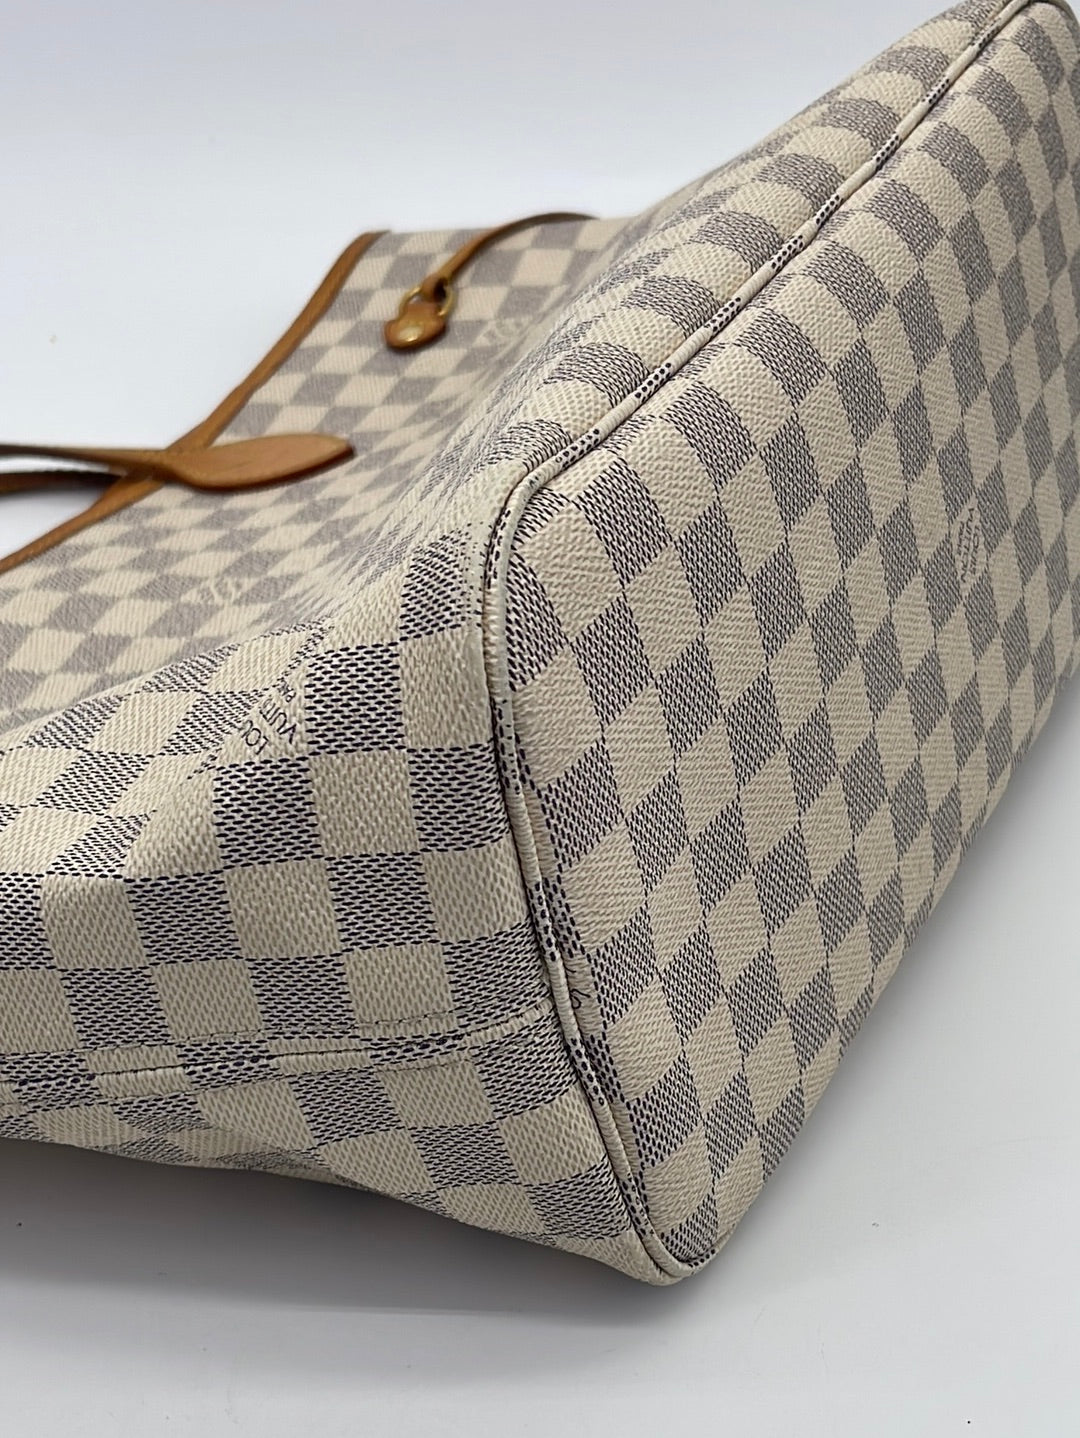 LOUIS VUITTON N51107 NEVERFULL DAMIER AZUR USED TOTE BAG LV A0323